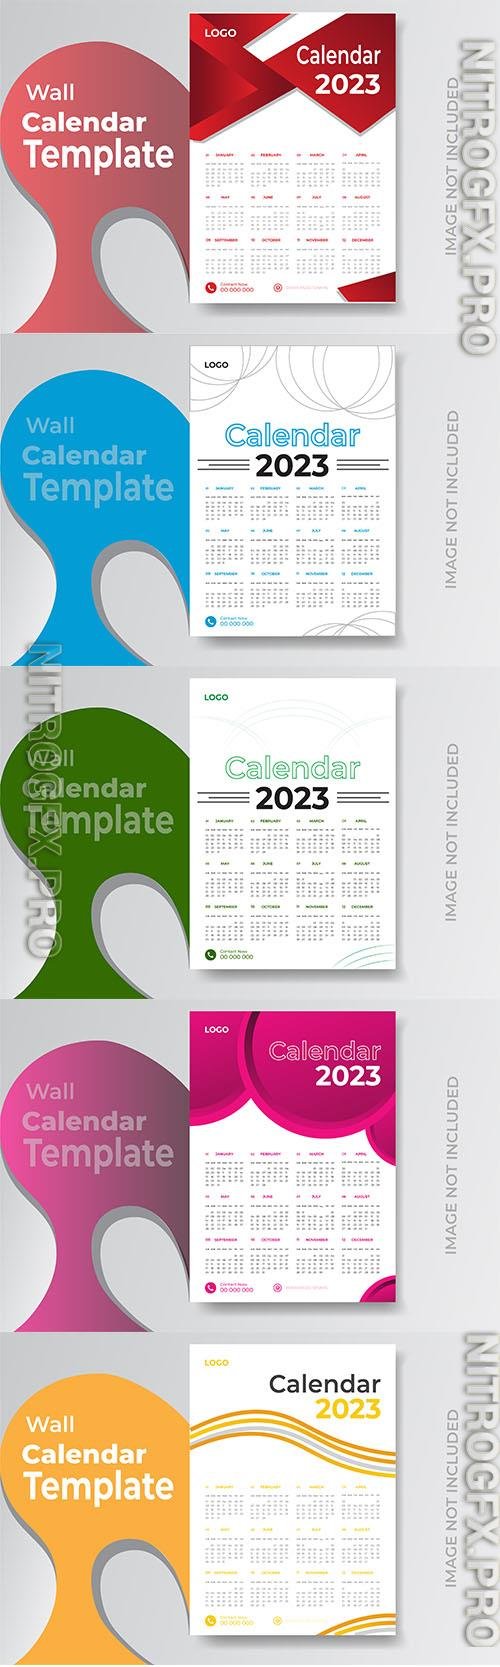 2023 calendar colorful design template for happy new year